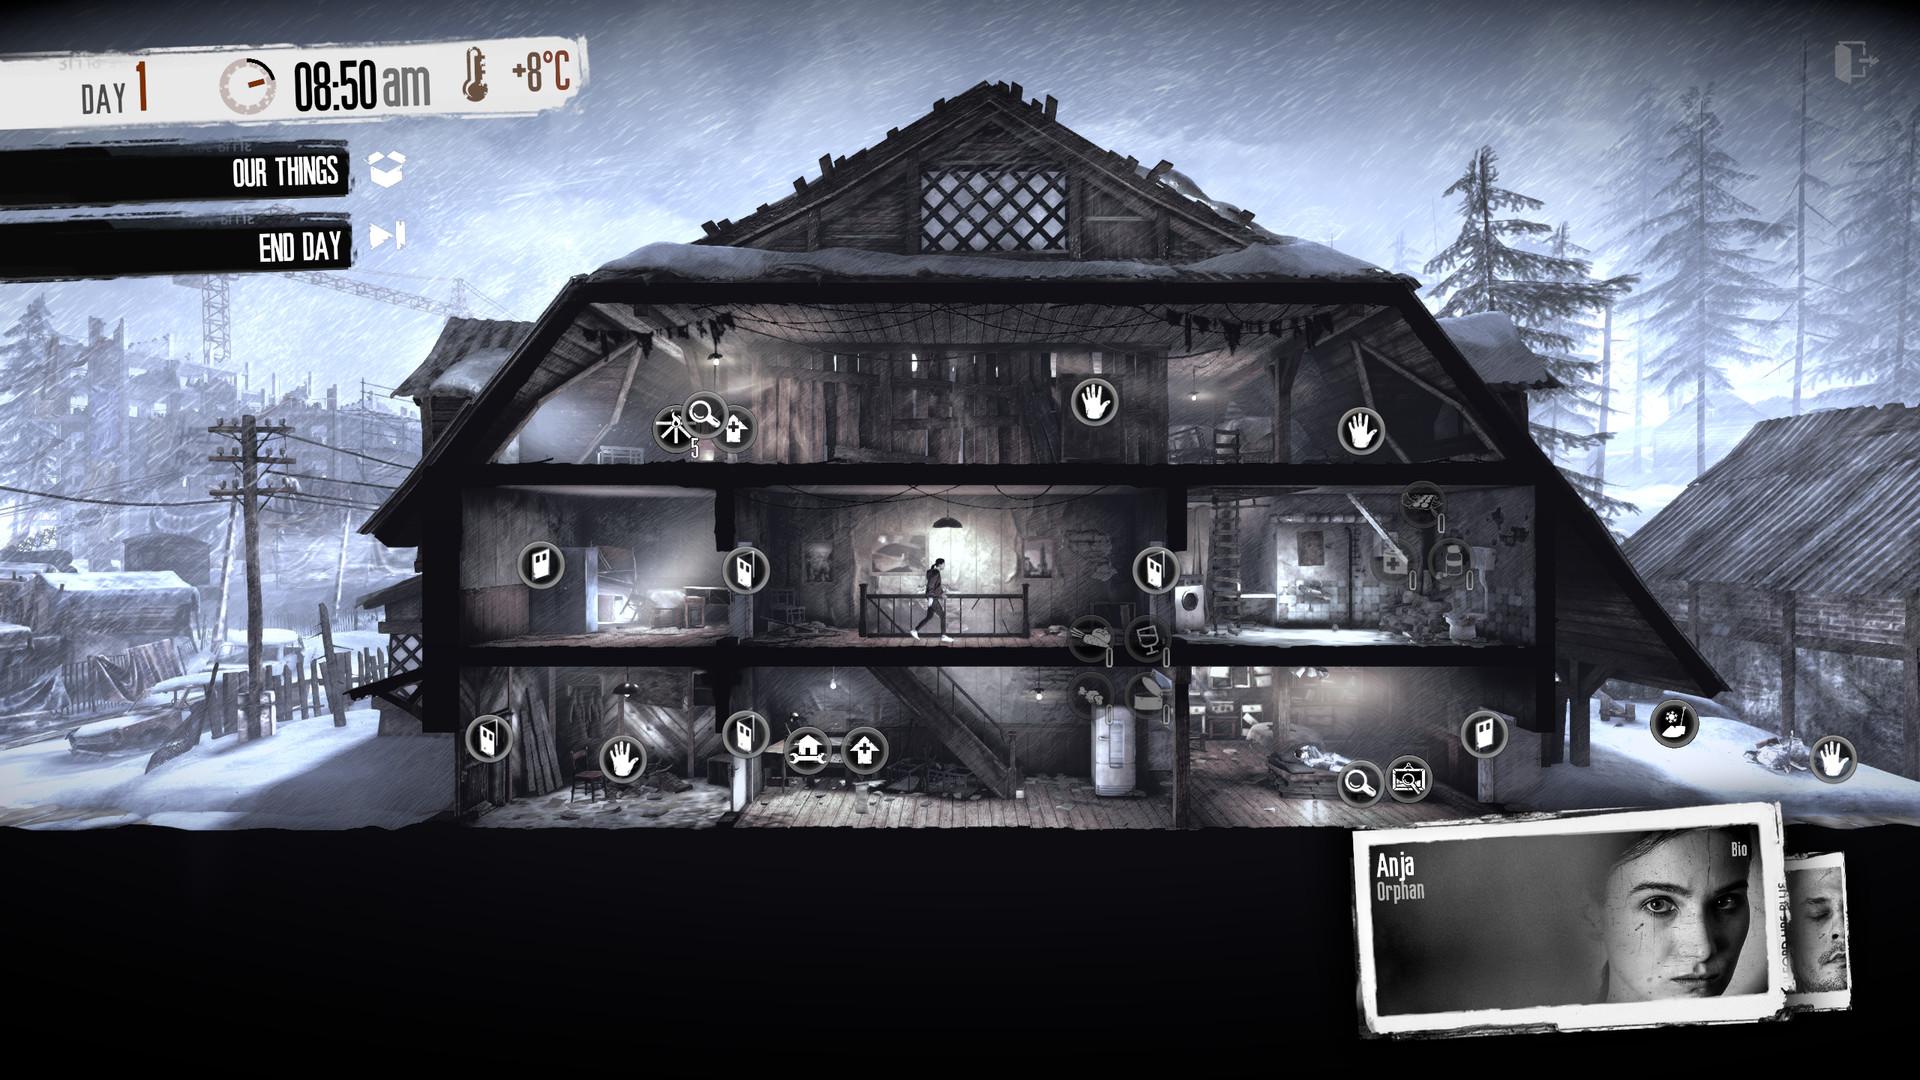 Screenshot №1 from game This War of Mine